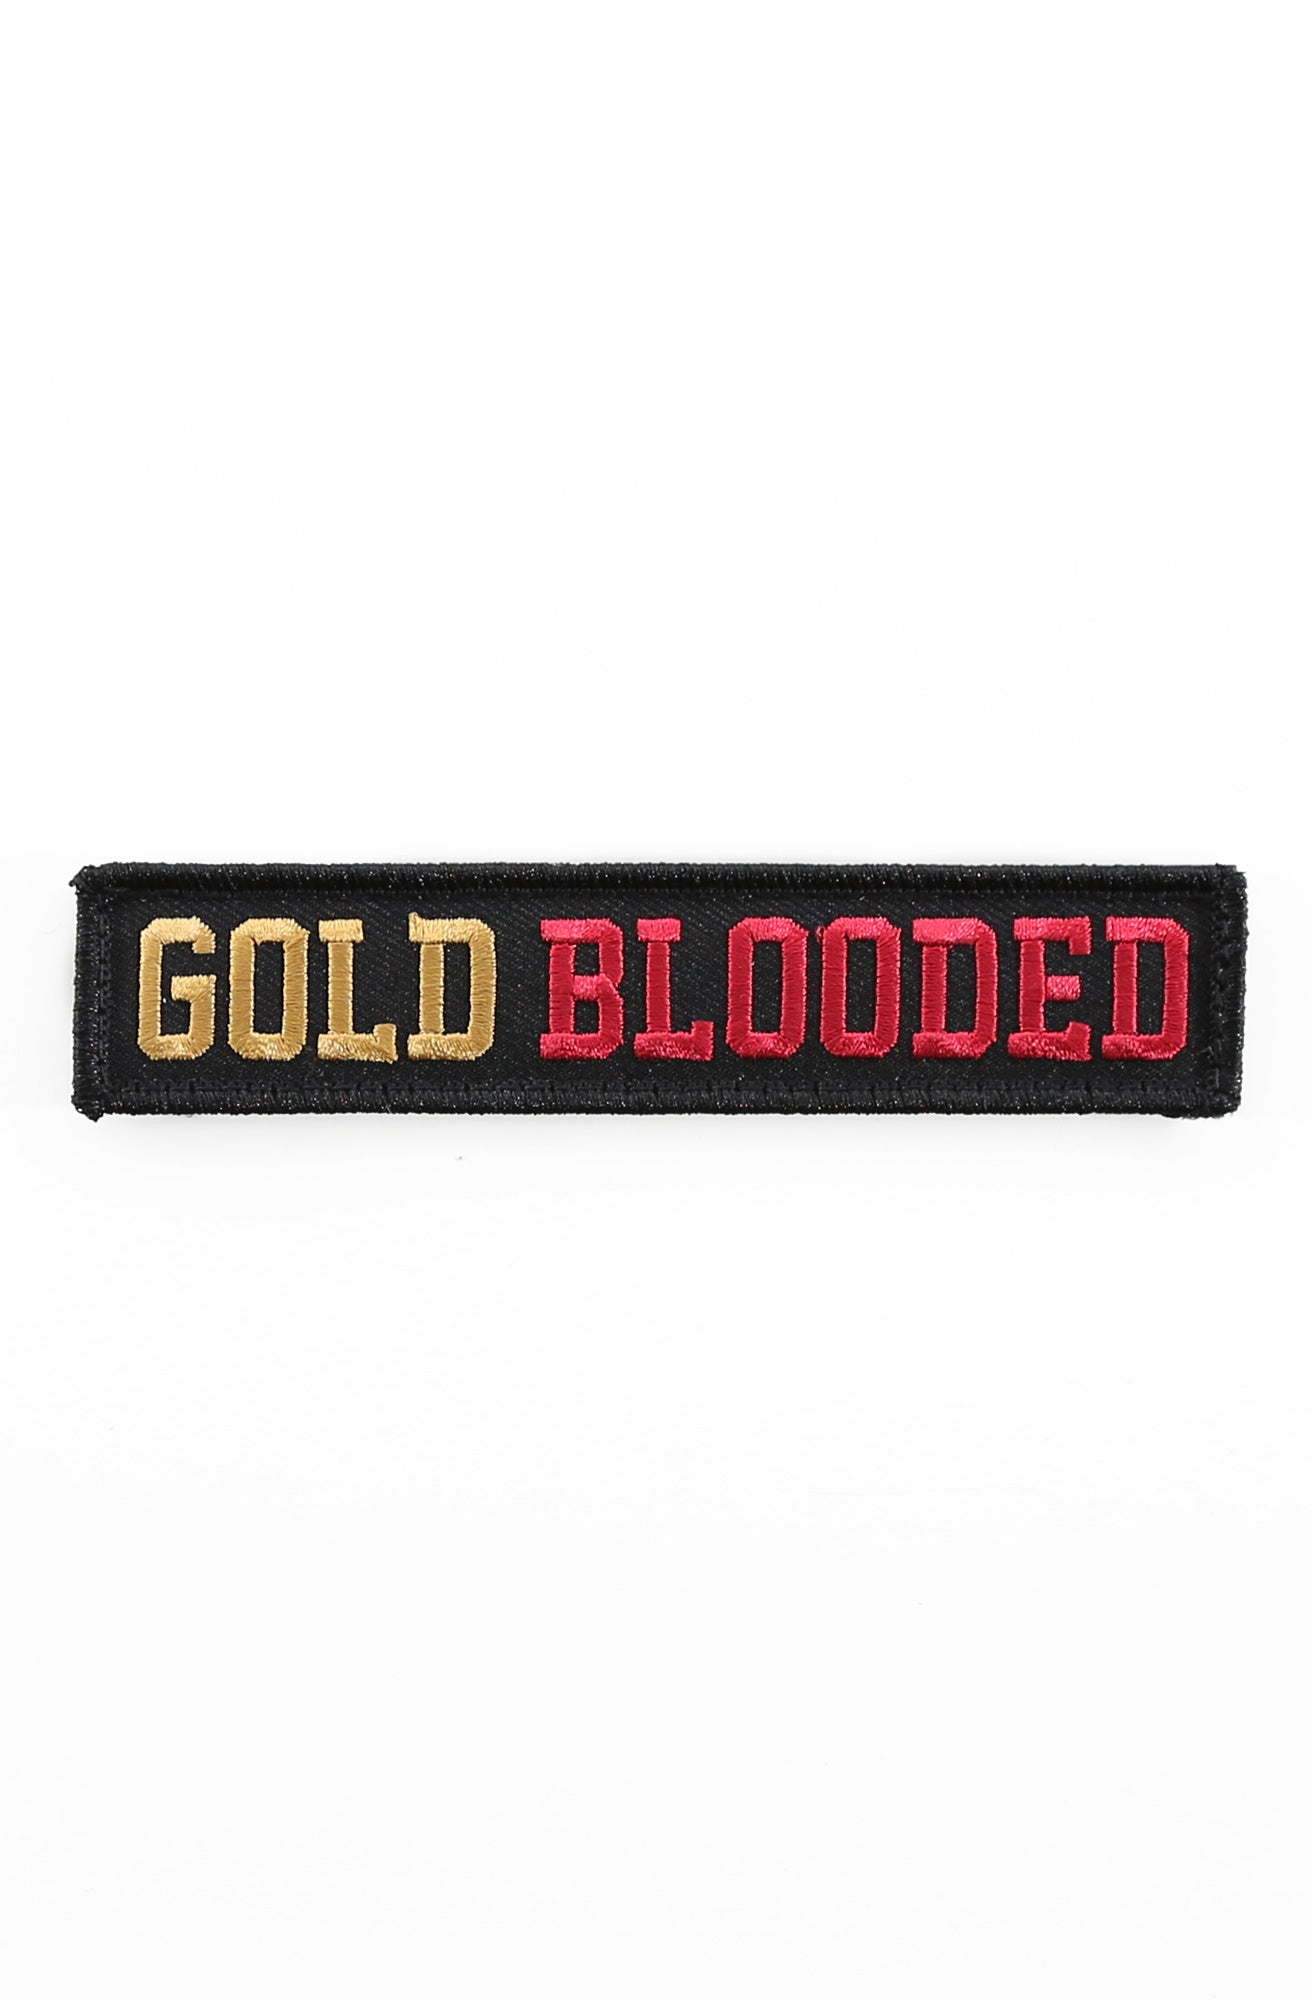 Gold Blooded (Black Velcro Patch 1" x 5")